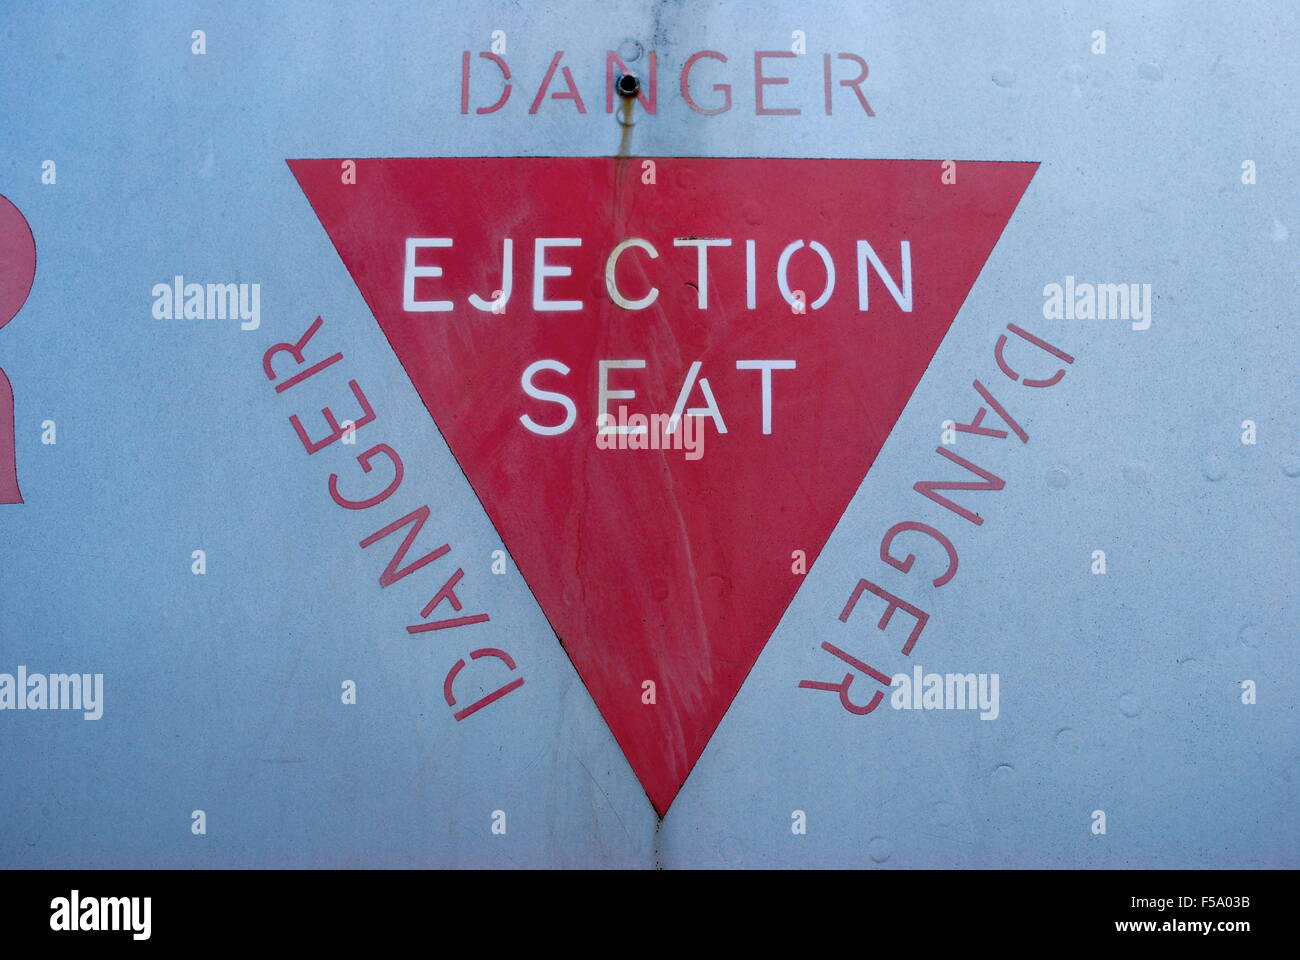 Danger ejection Seat sign on airplane Stock Photo